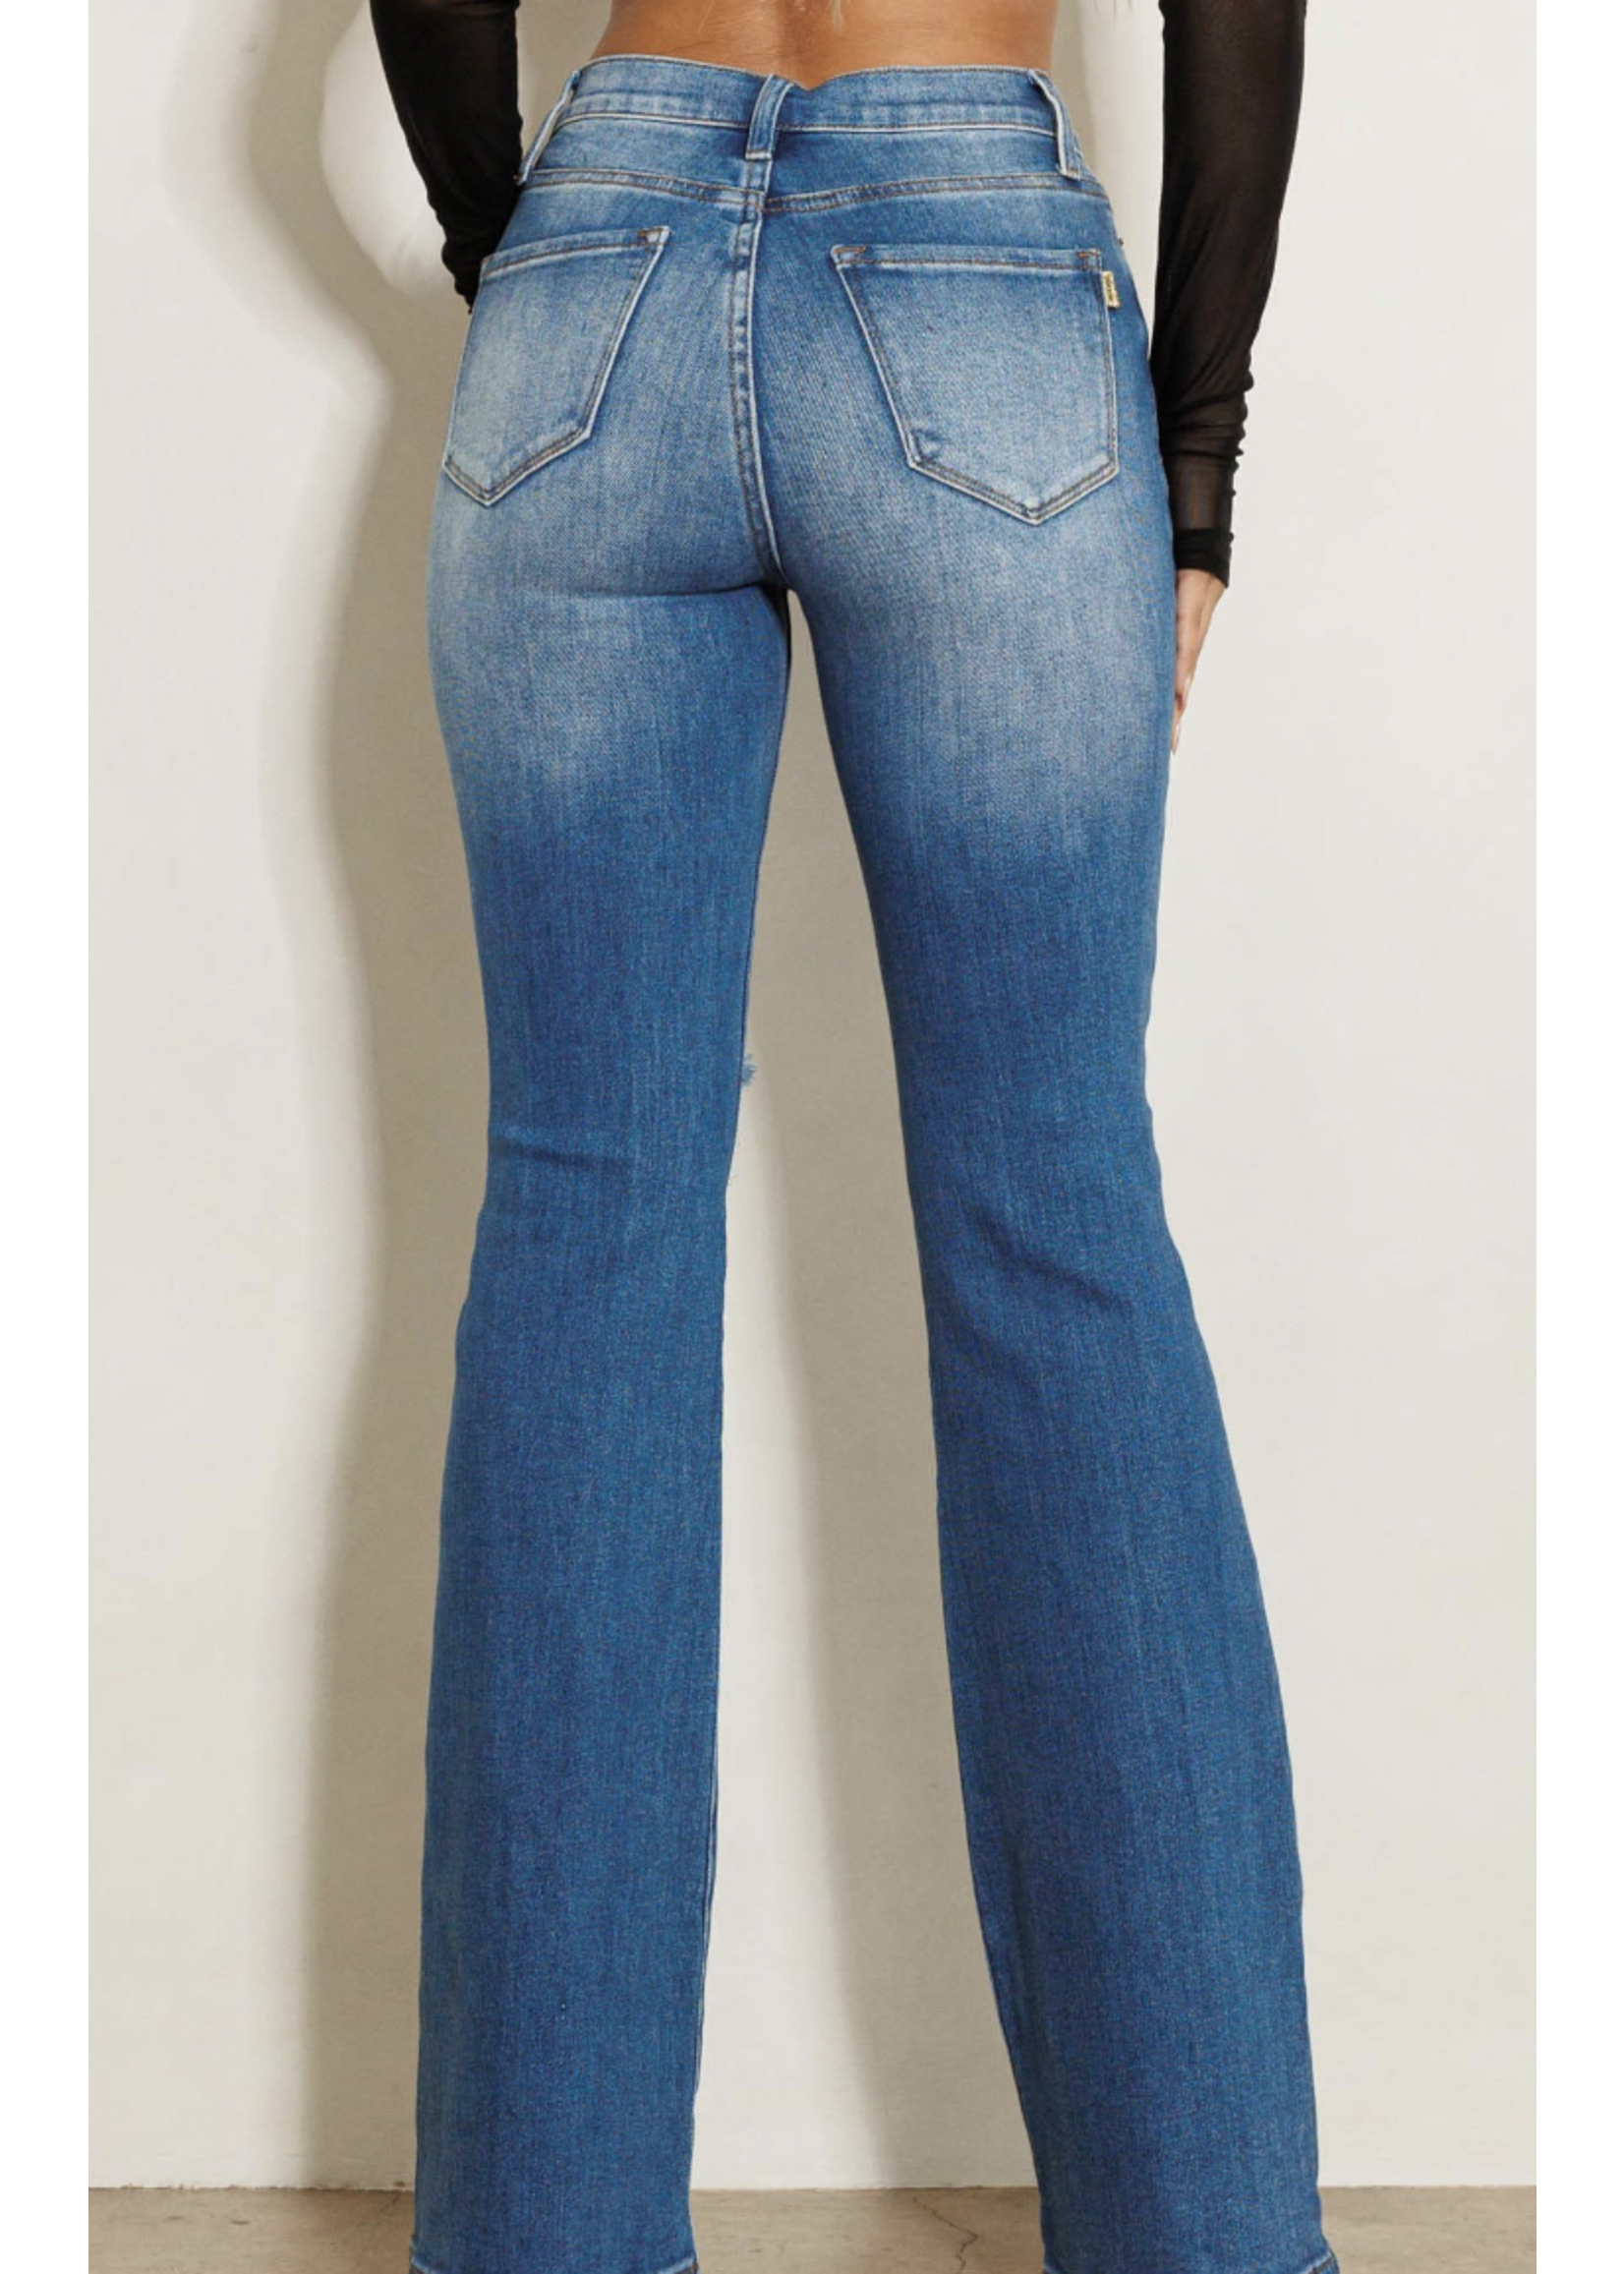 Perfectly Cute Boot Cut Jeans